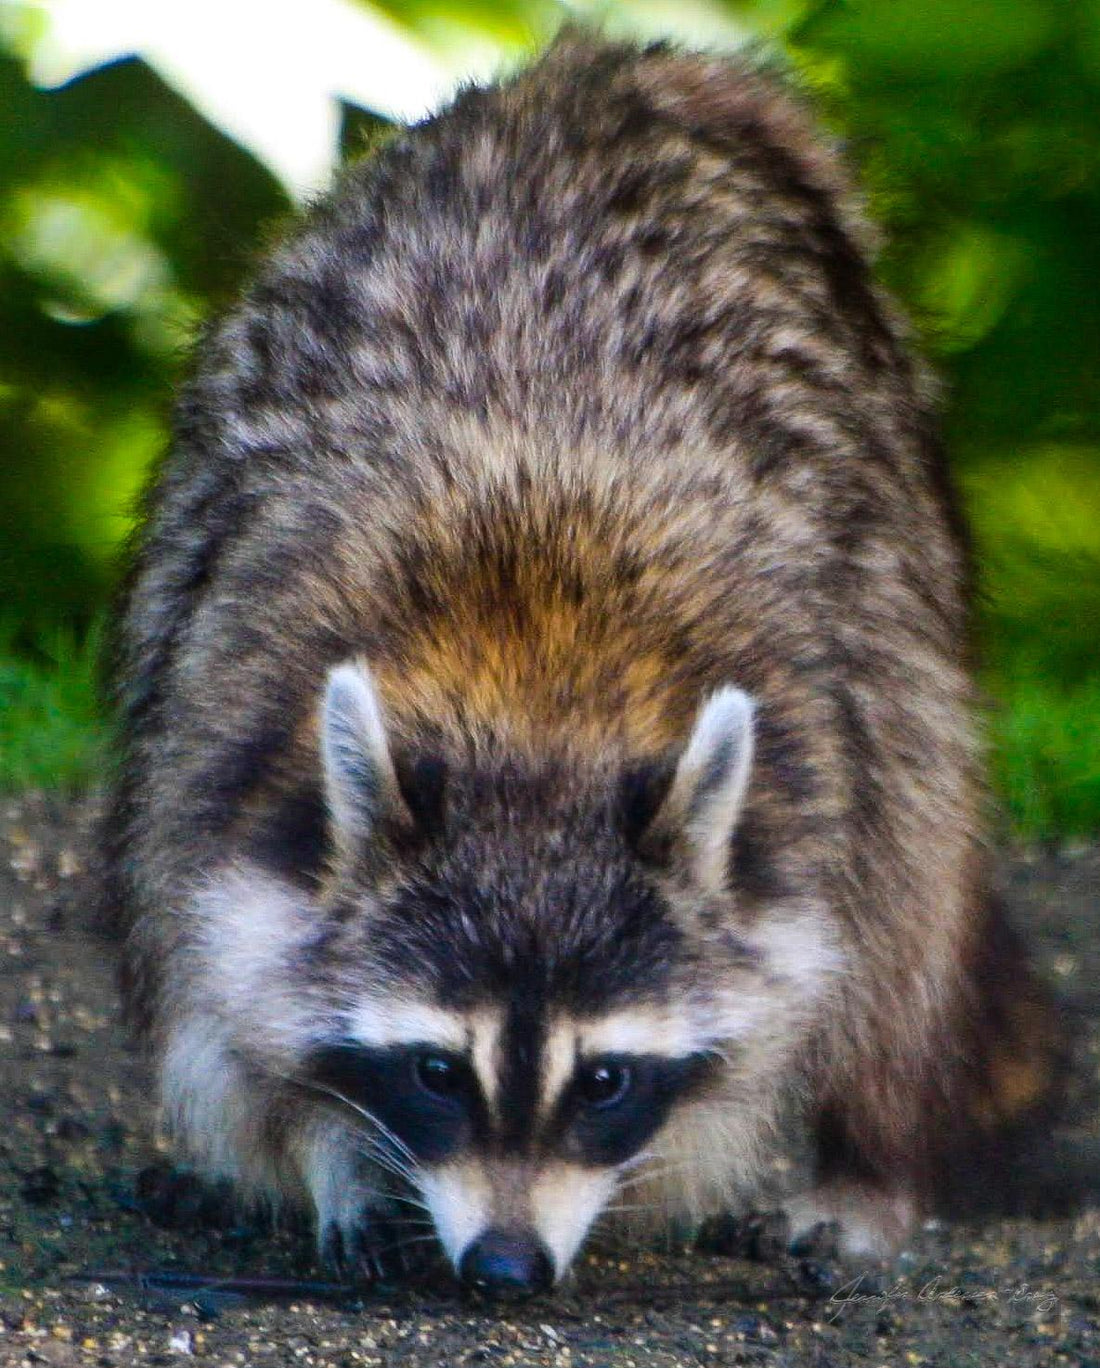 MWC Eco-brief: Then meaning of the word "Racoon"